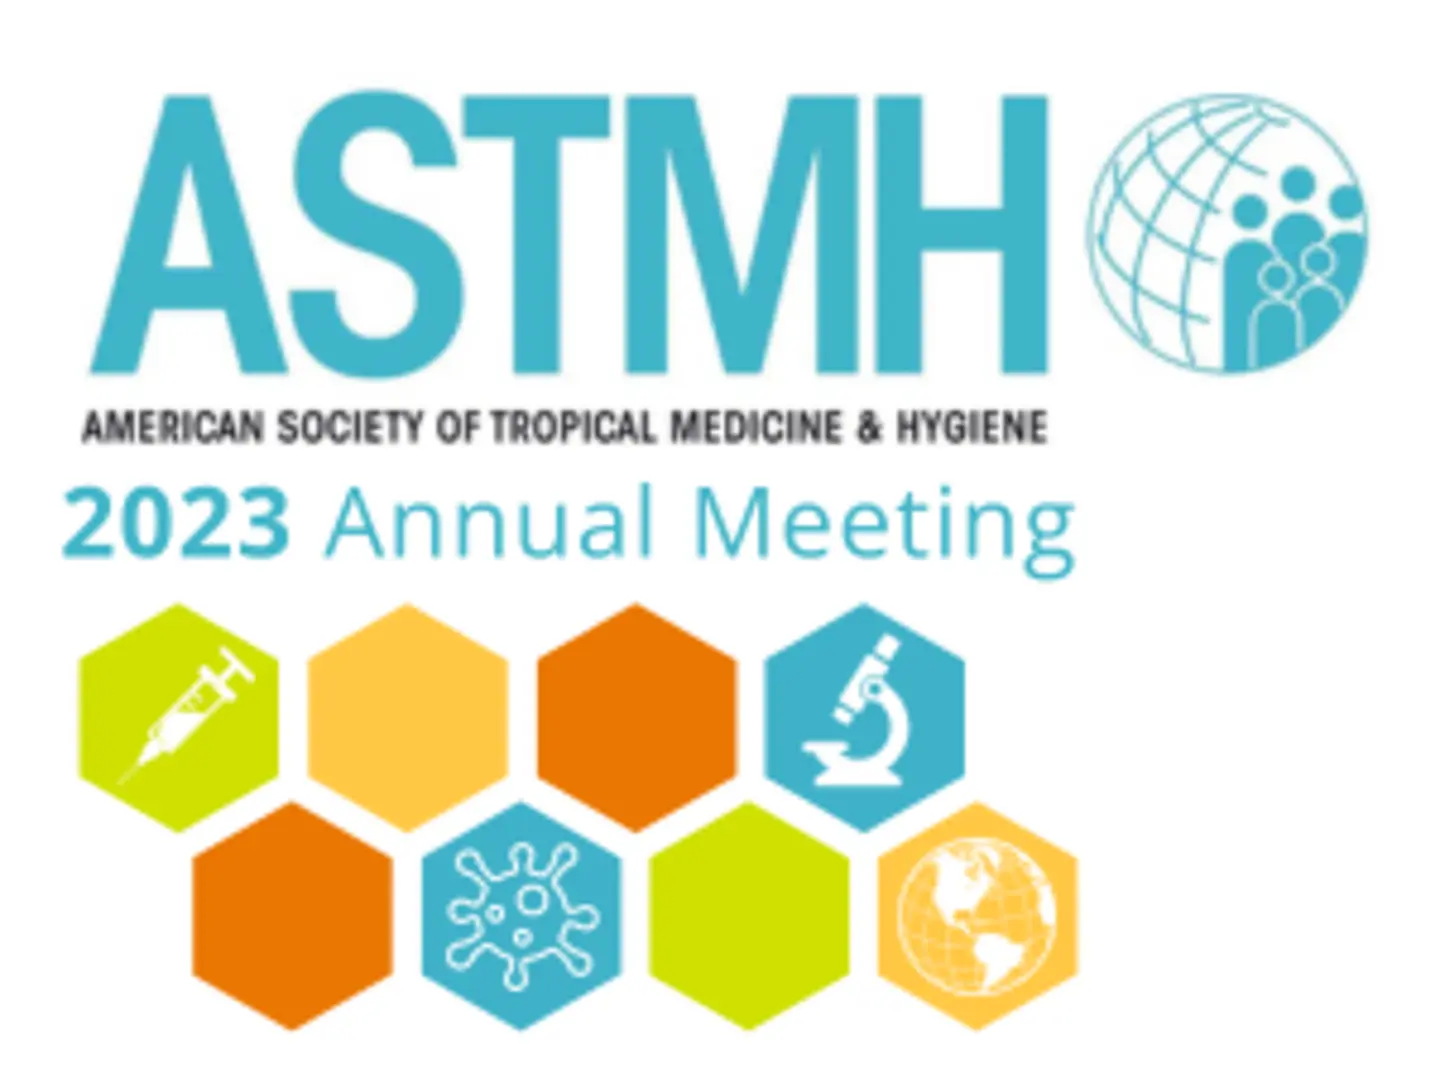 American Society of Tropical Medicine and Hygiene (ASTMH) 2023 Annual